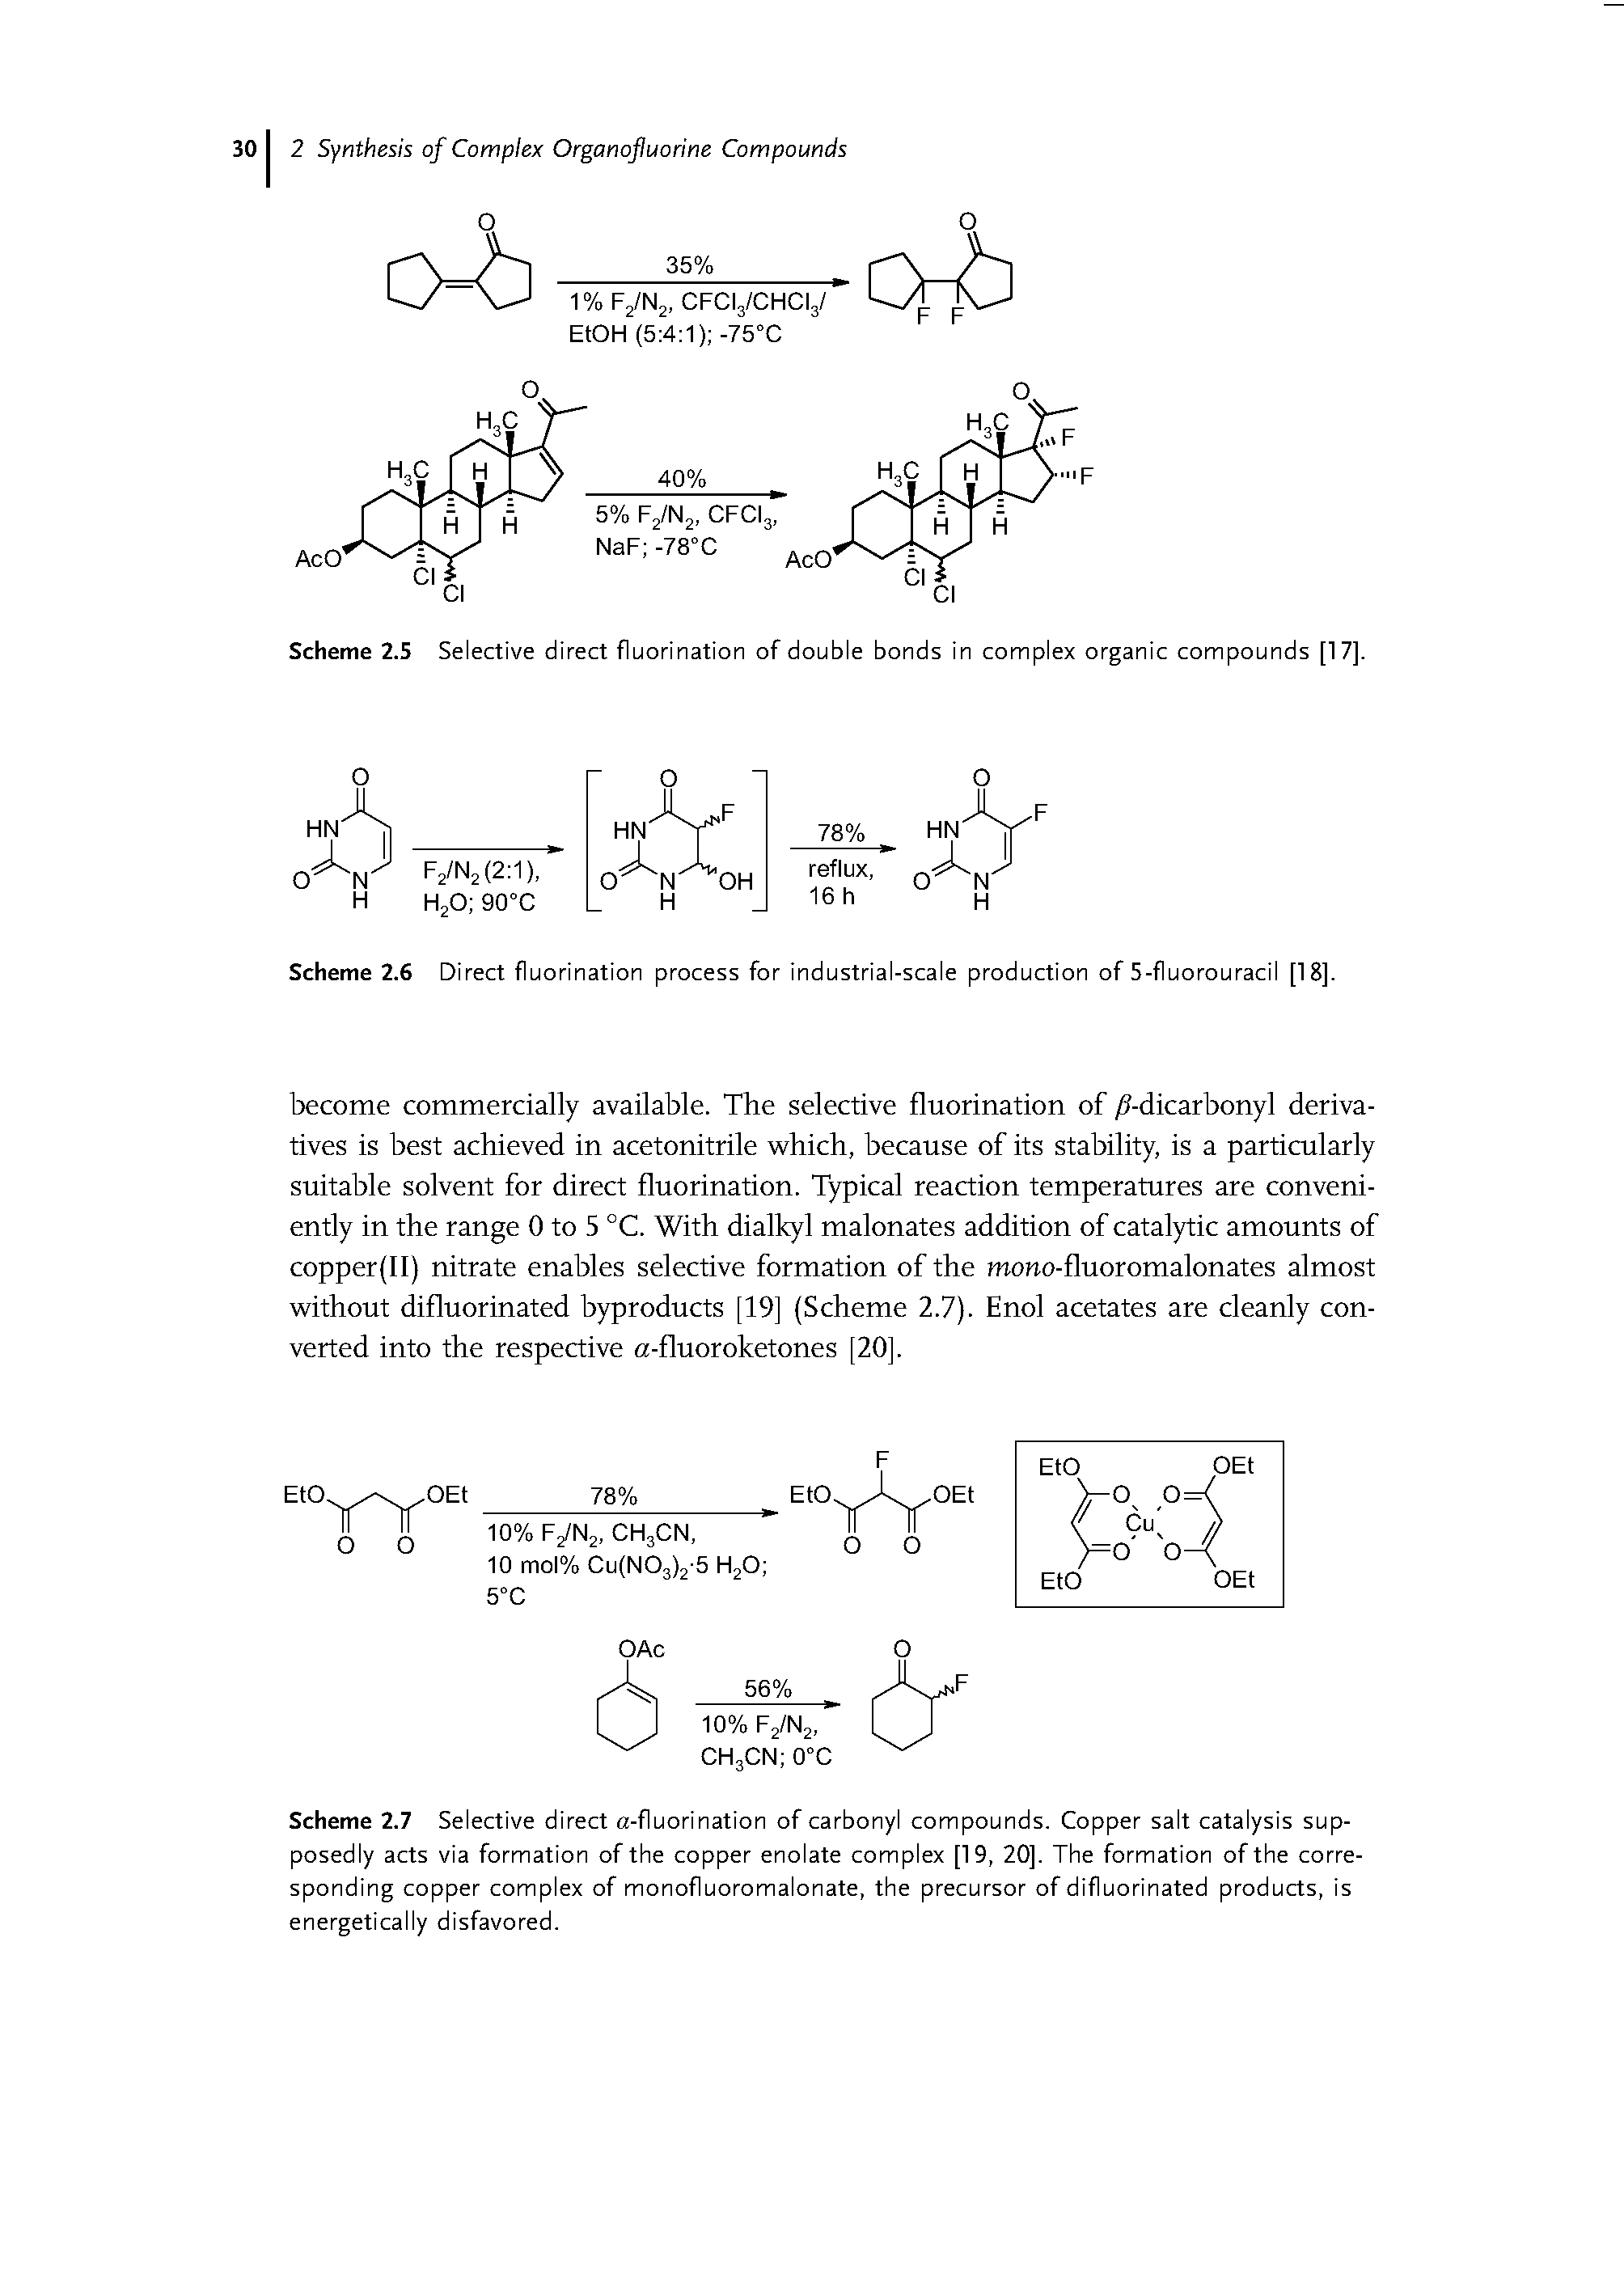 Scheme 2.7 Selective direct a-fluorination of carbonyl compounds. Copper salt catalysis supposedly acts via formation of the copper enolate complex [19, 20], The formation of the corresponding copper complex of monofluoromalonate, the precursor of difluorinated products, is energetically disfavored.